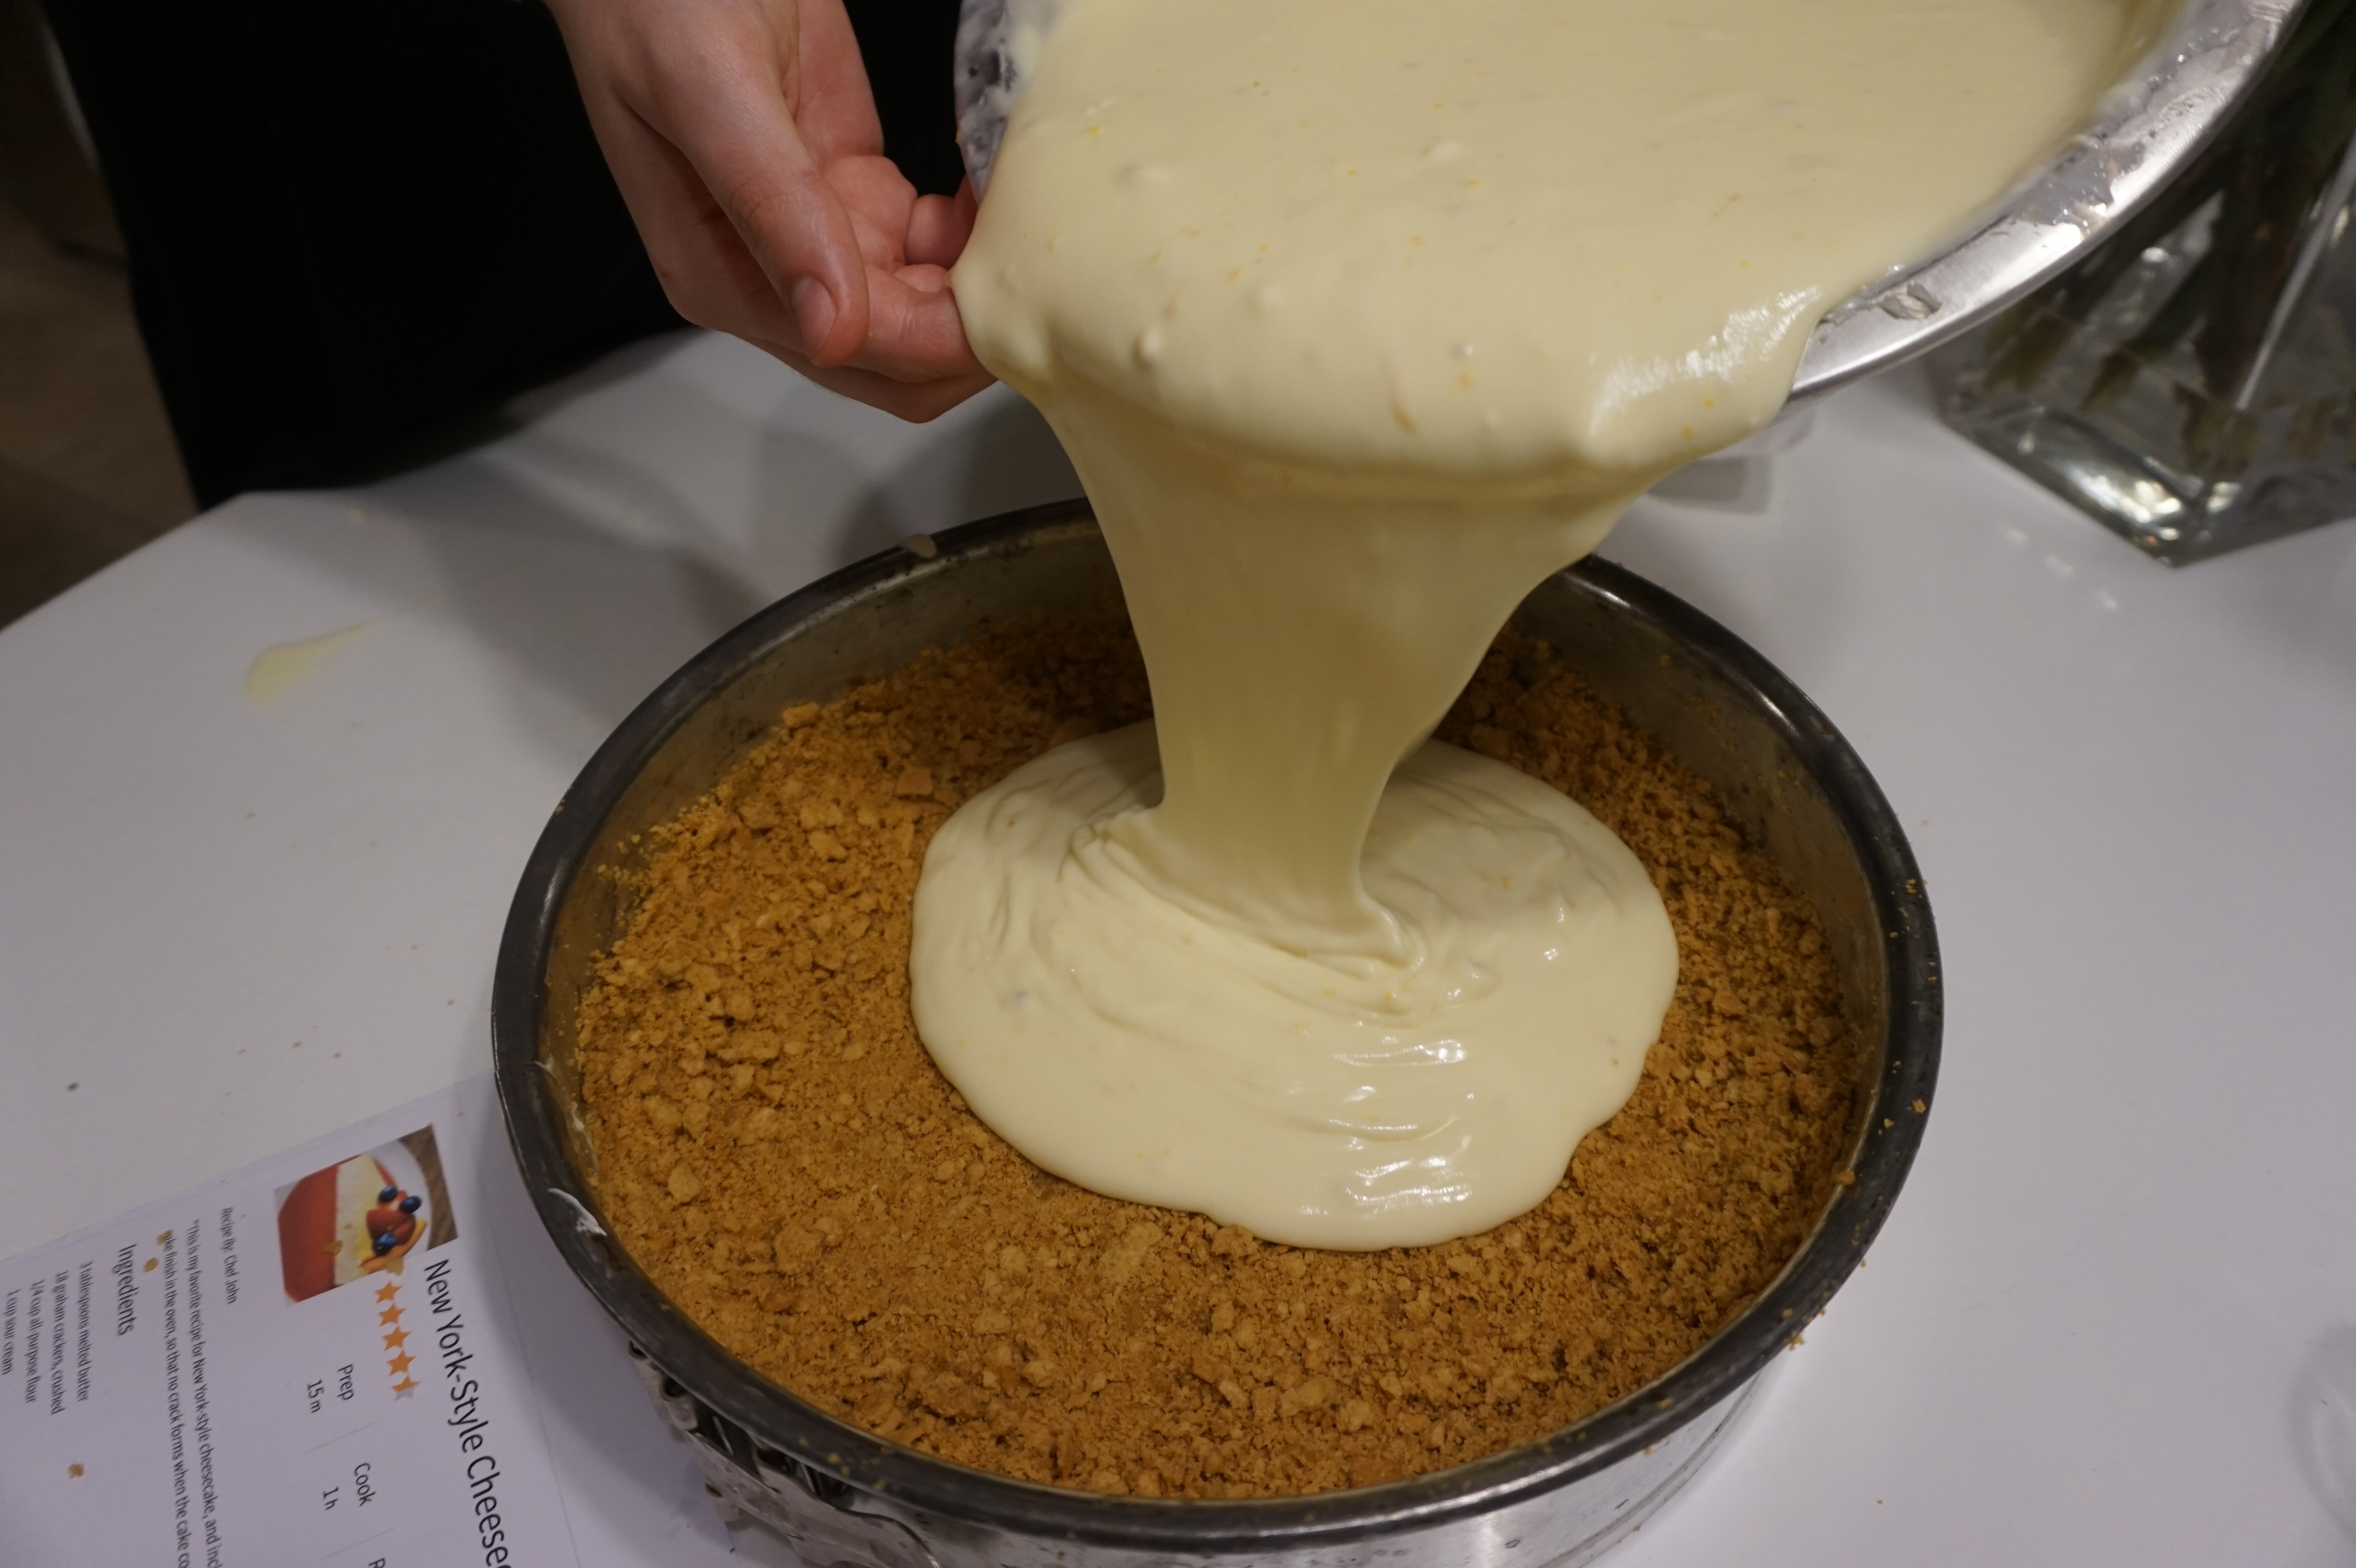 Step 9: Pouring the mixture into the springform pan